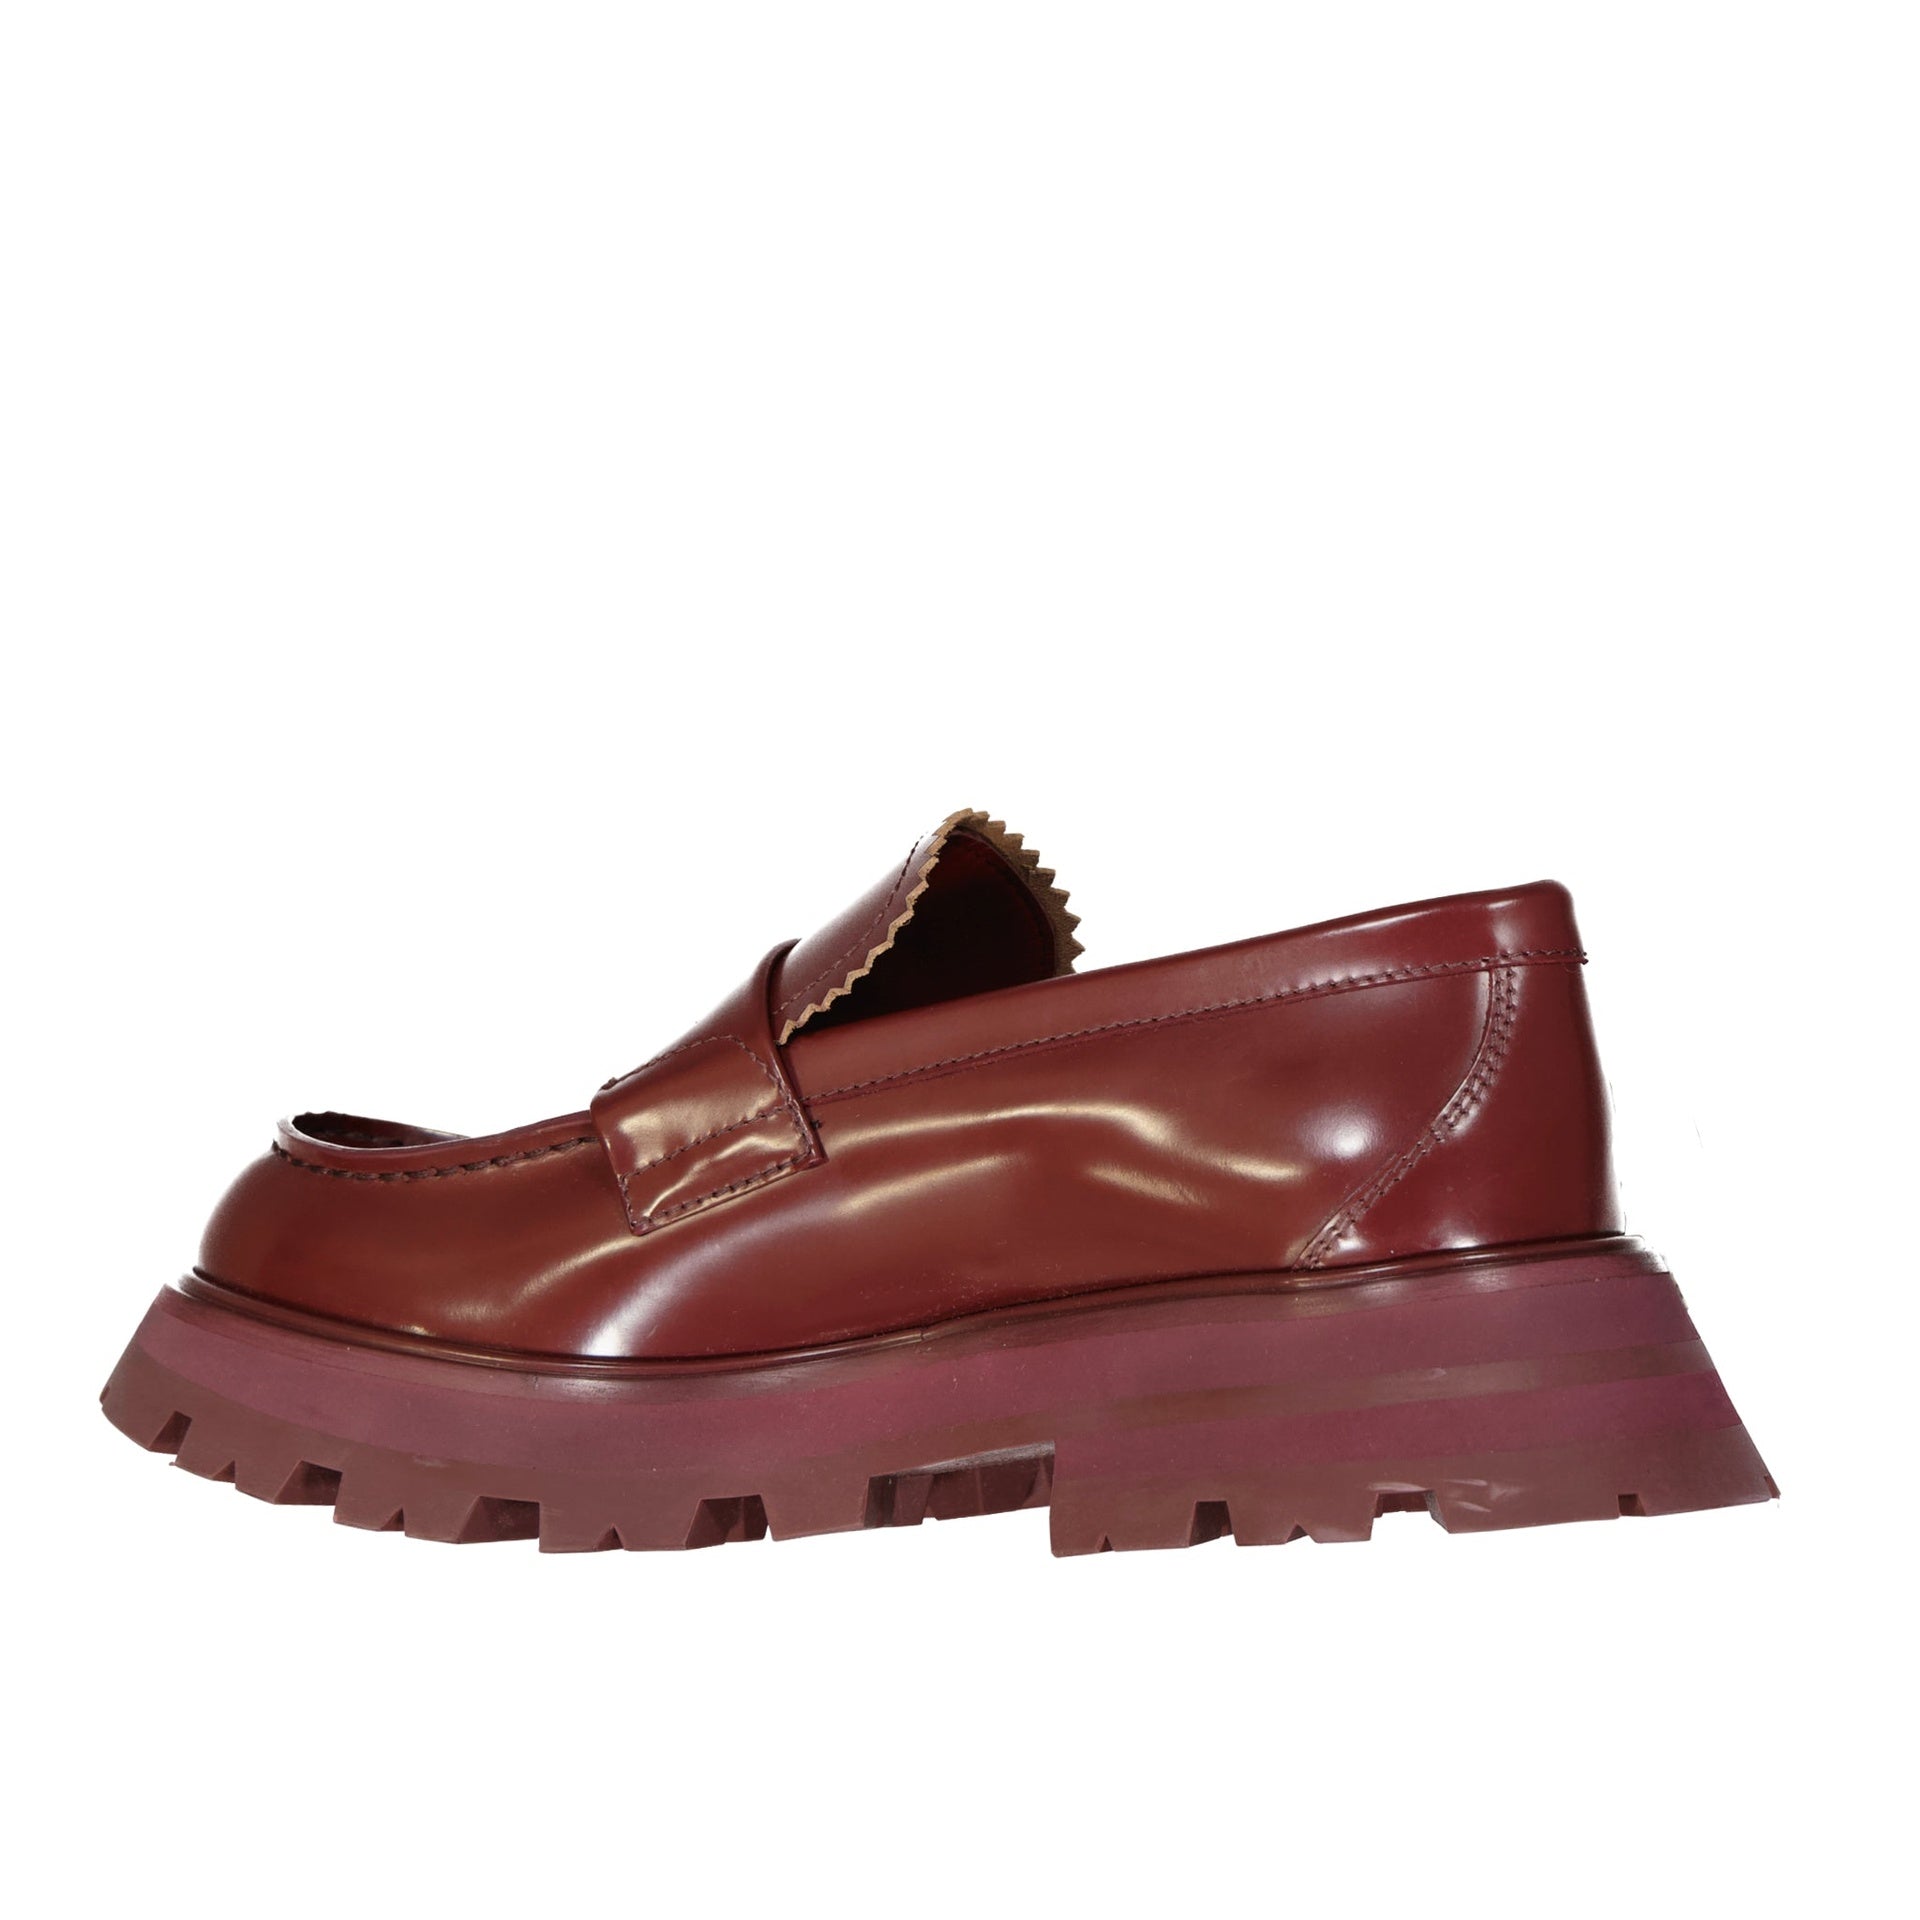 ALEXANDER-MCQUEEN-OUTLET-SALE-Alexander-Mcqueen-Leather-Loafers-Flache-Schuhe-RED-39-ARCHIVE-COLLECTION-3.jpg